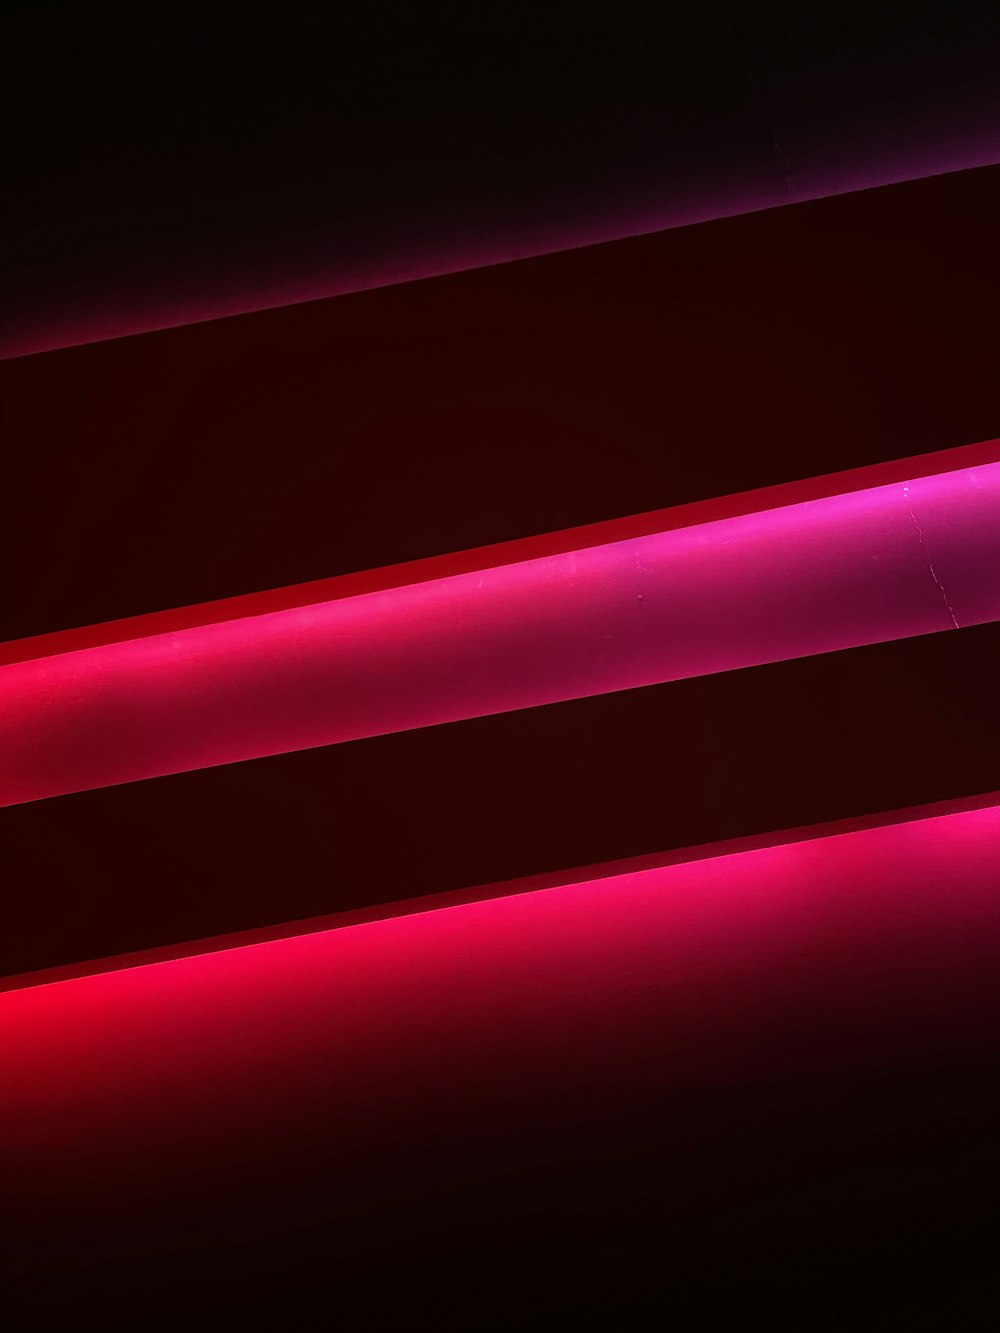 a close up of a red and purple light